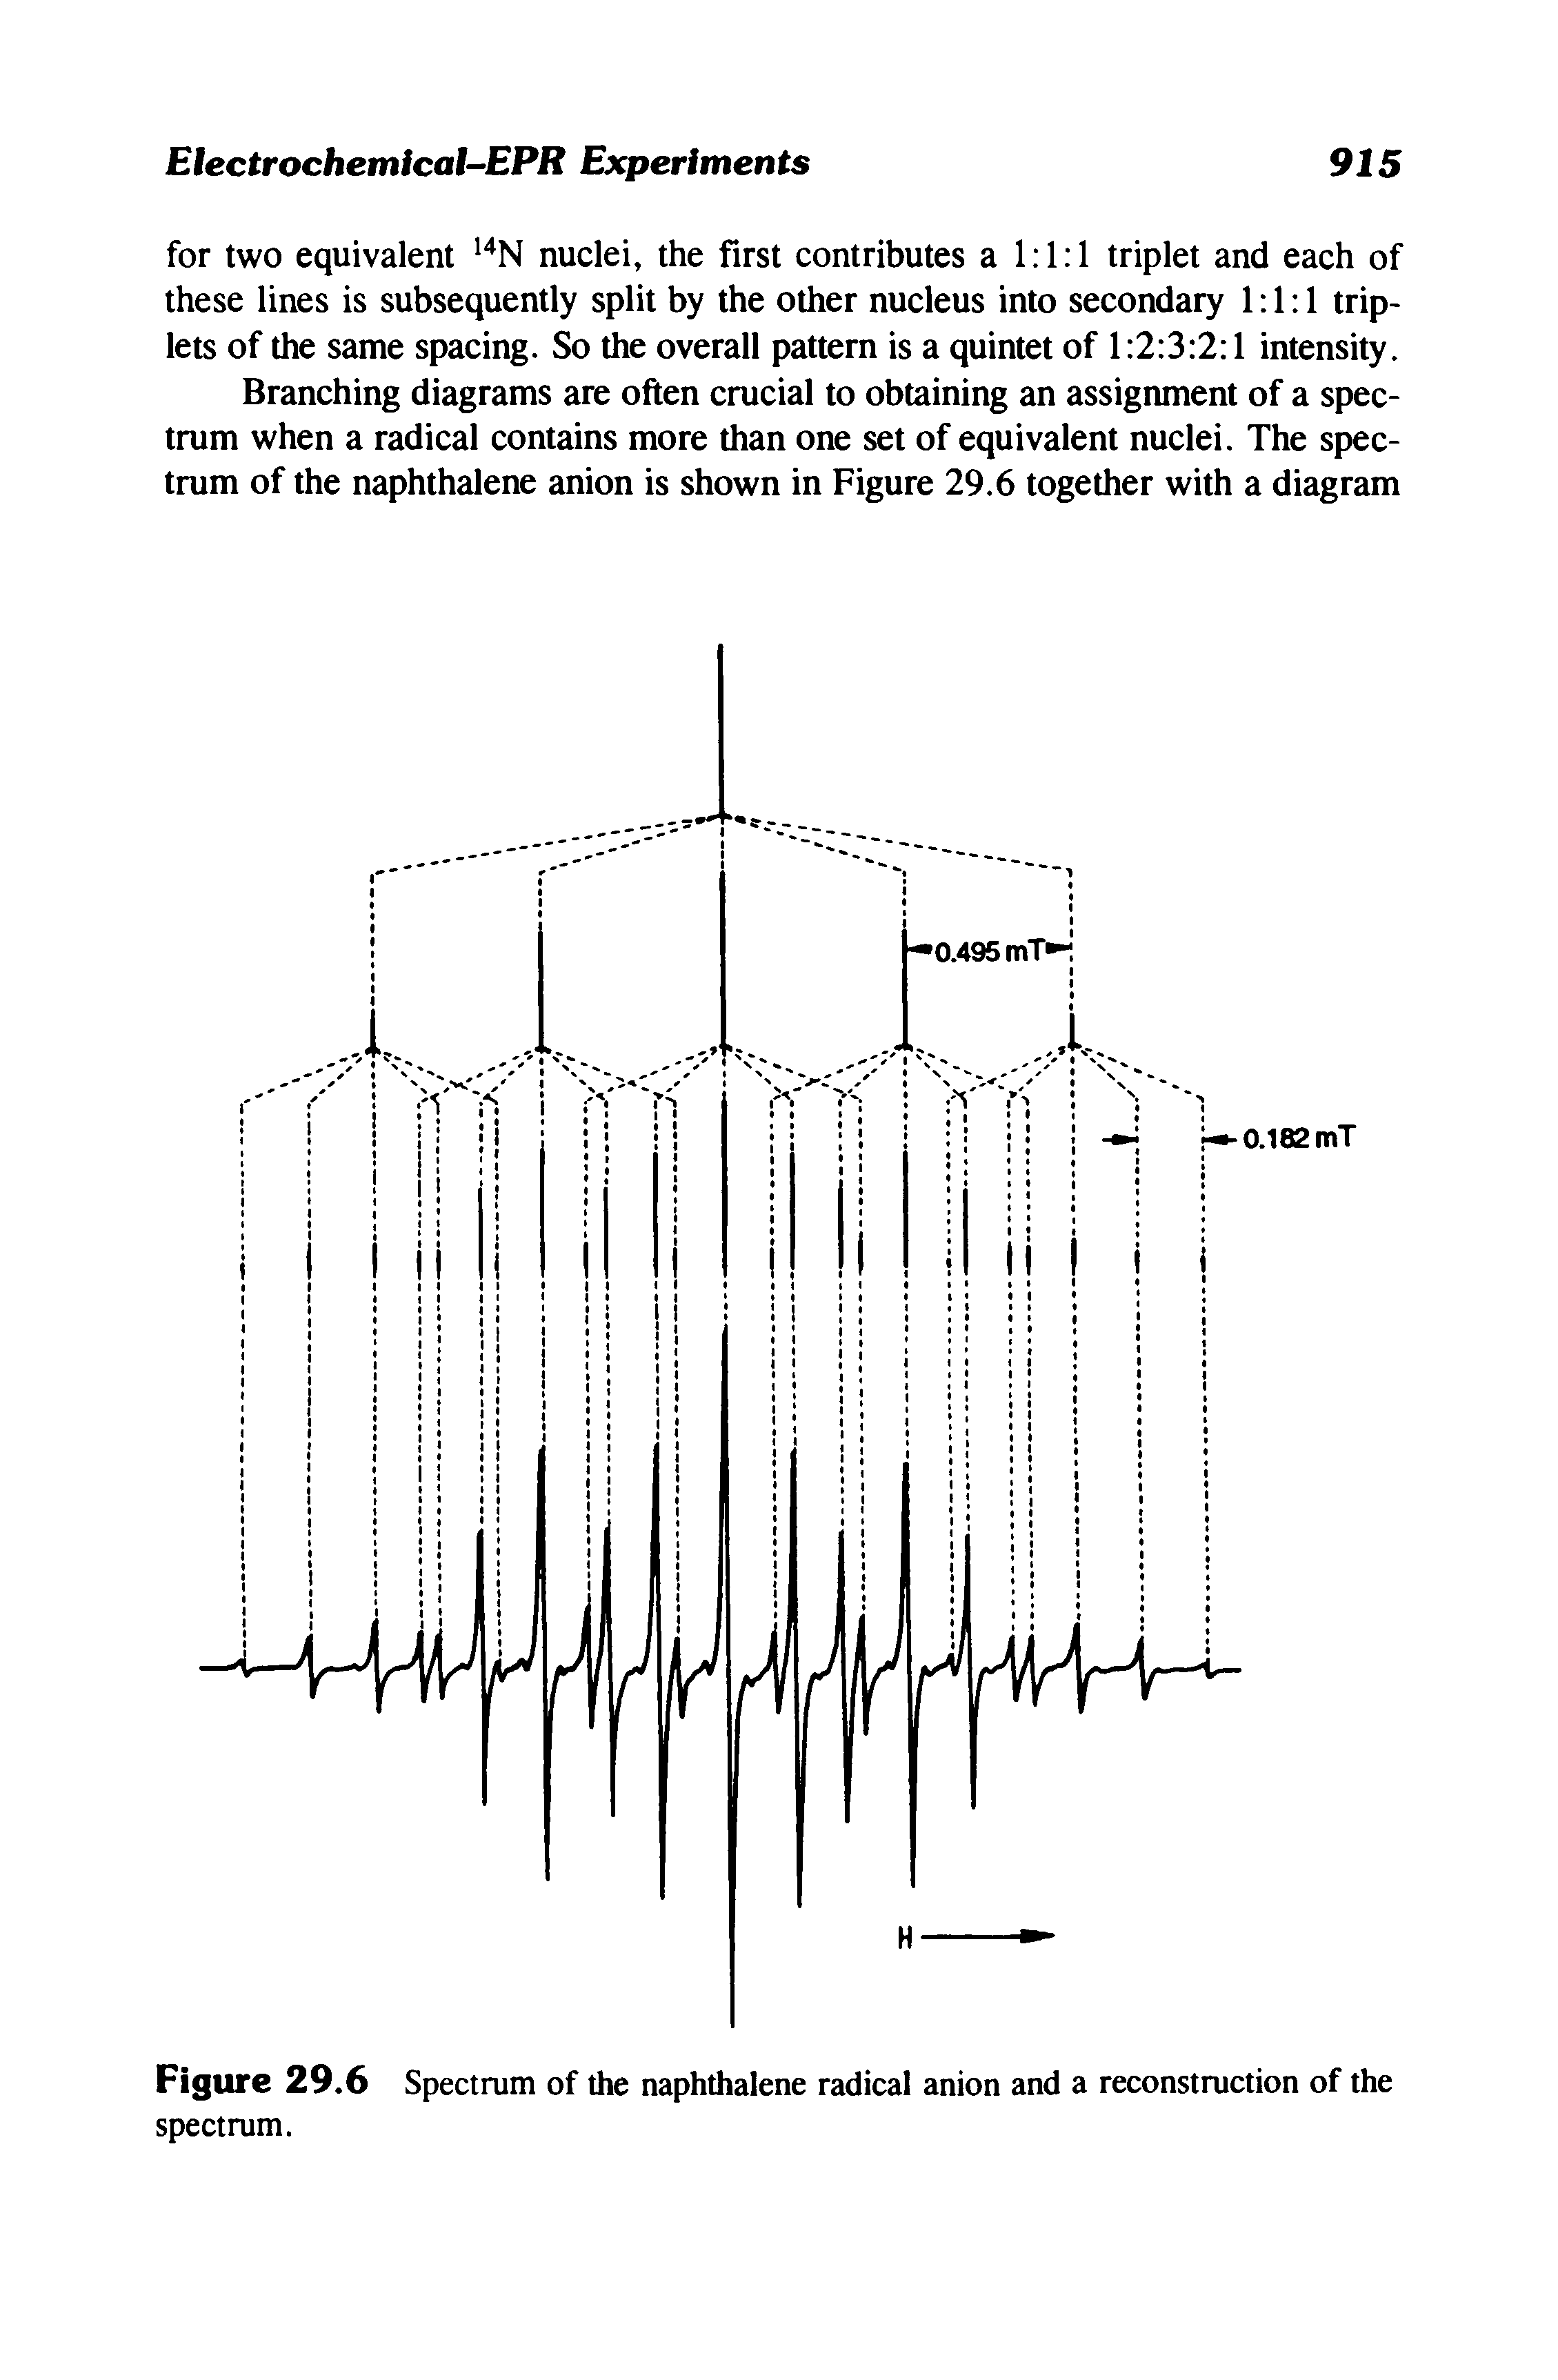 Figure 29.6 Spectrum of the naphthalene radical anion and a reconstruction of the spectrum.